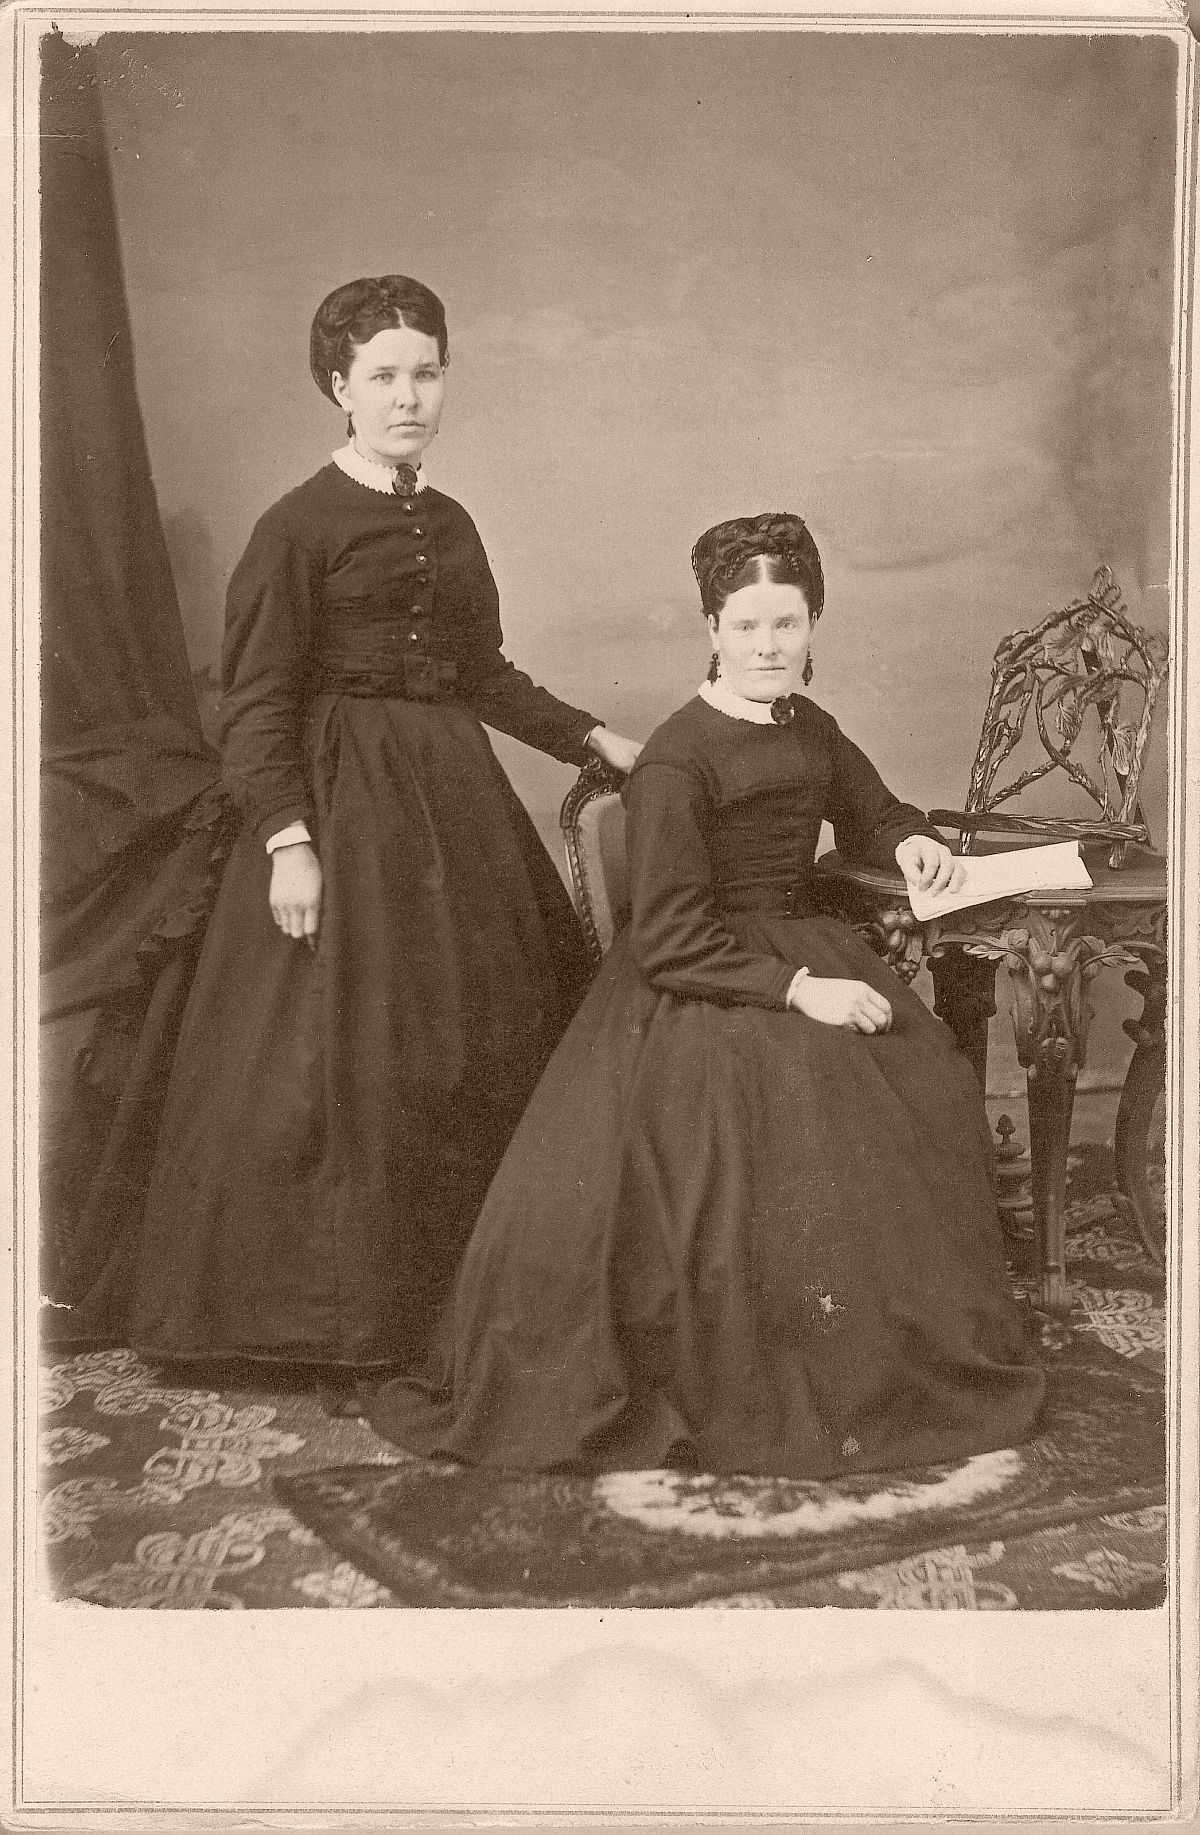 cabinet-cards-1880s-to-1890s-vintage-19th-century-victorian-era-23